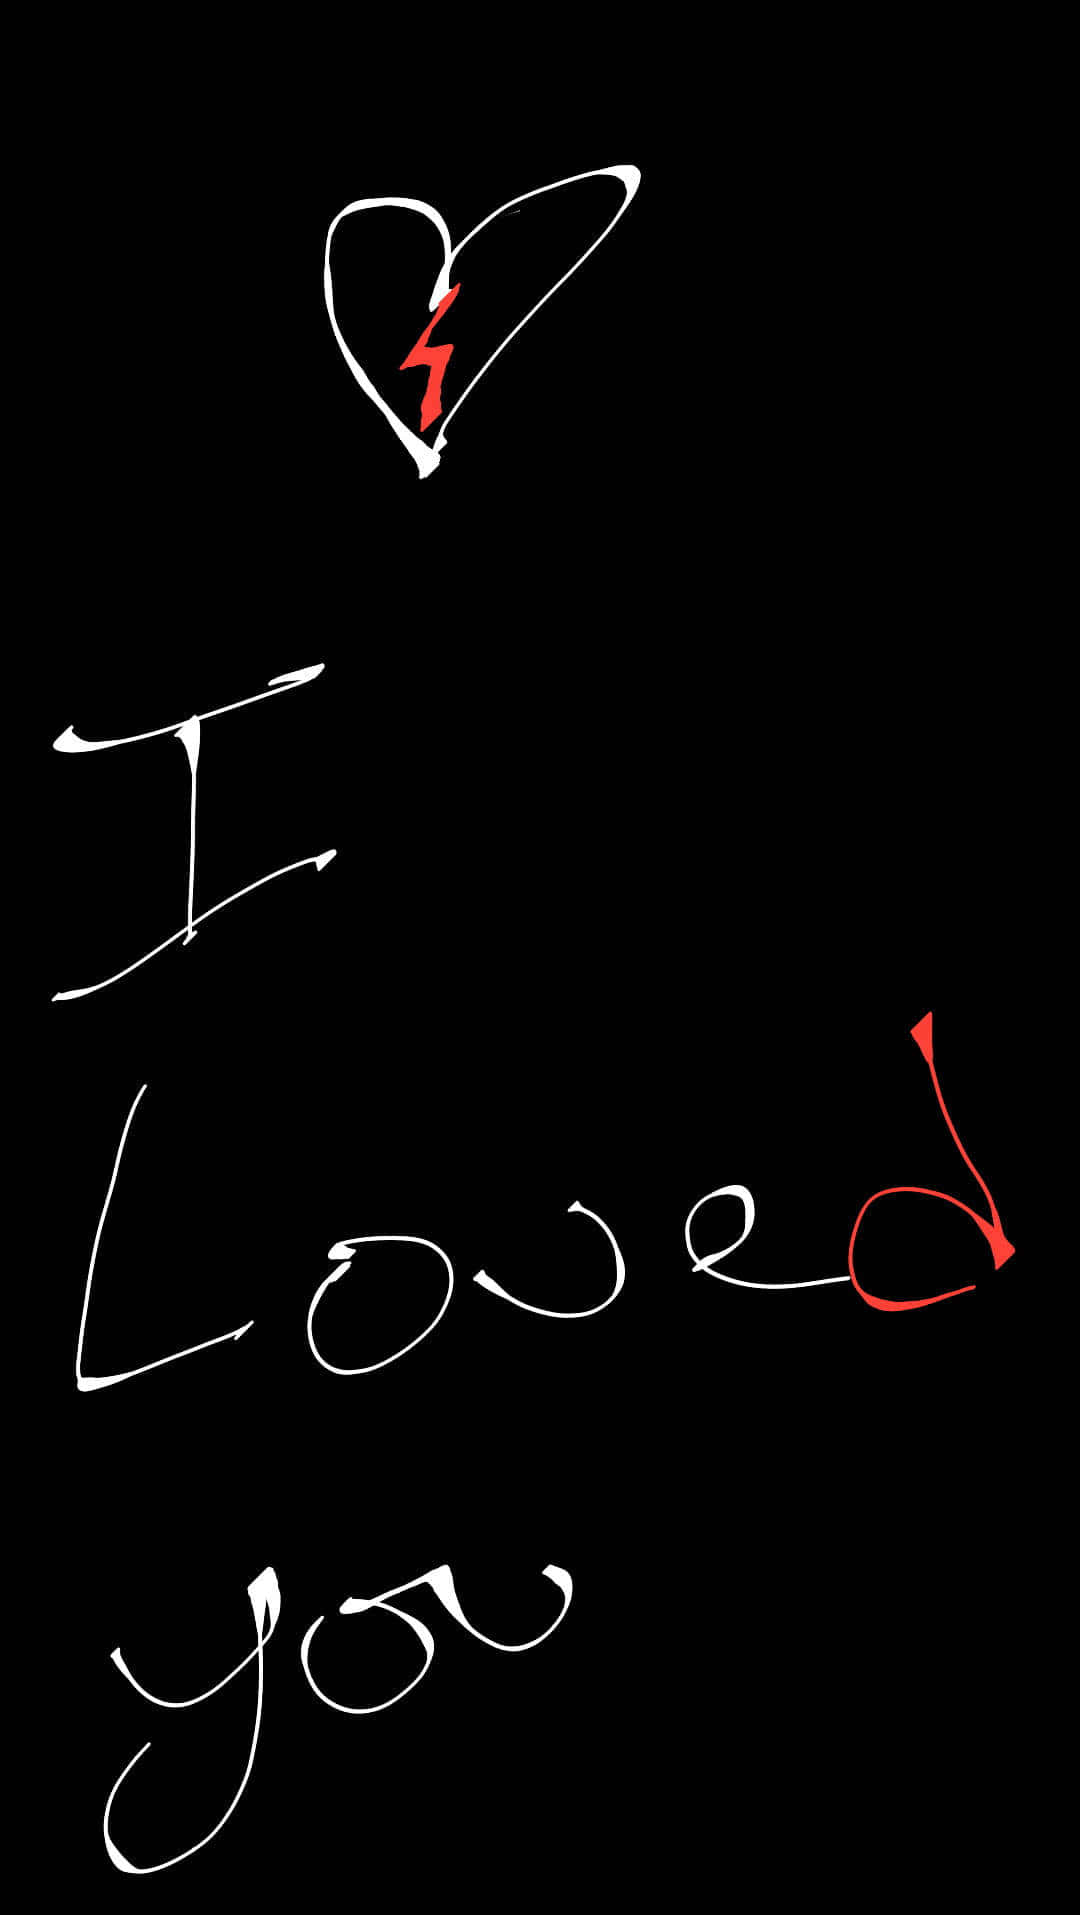 I Love You Written In Red On A Black Background